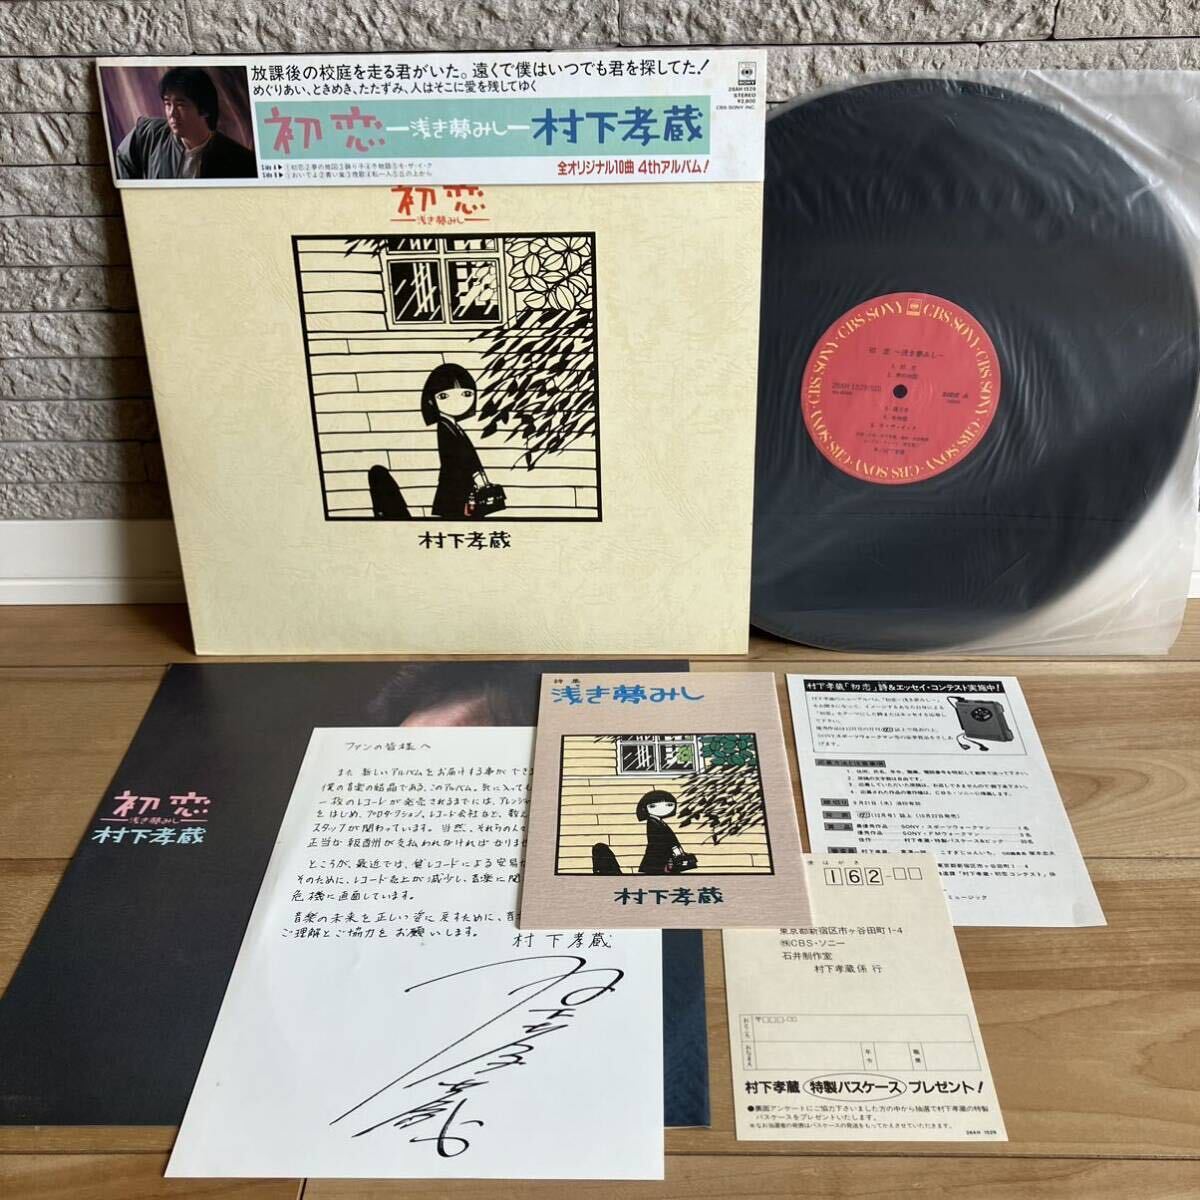  almost new goods!NM* poetry compilation * post card *.. obi attaching *LP* Murashita Kozo [ the first .]*1983 year 28AH1529*CITY POP peace mono Light Mellow City pop 